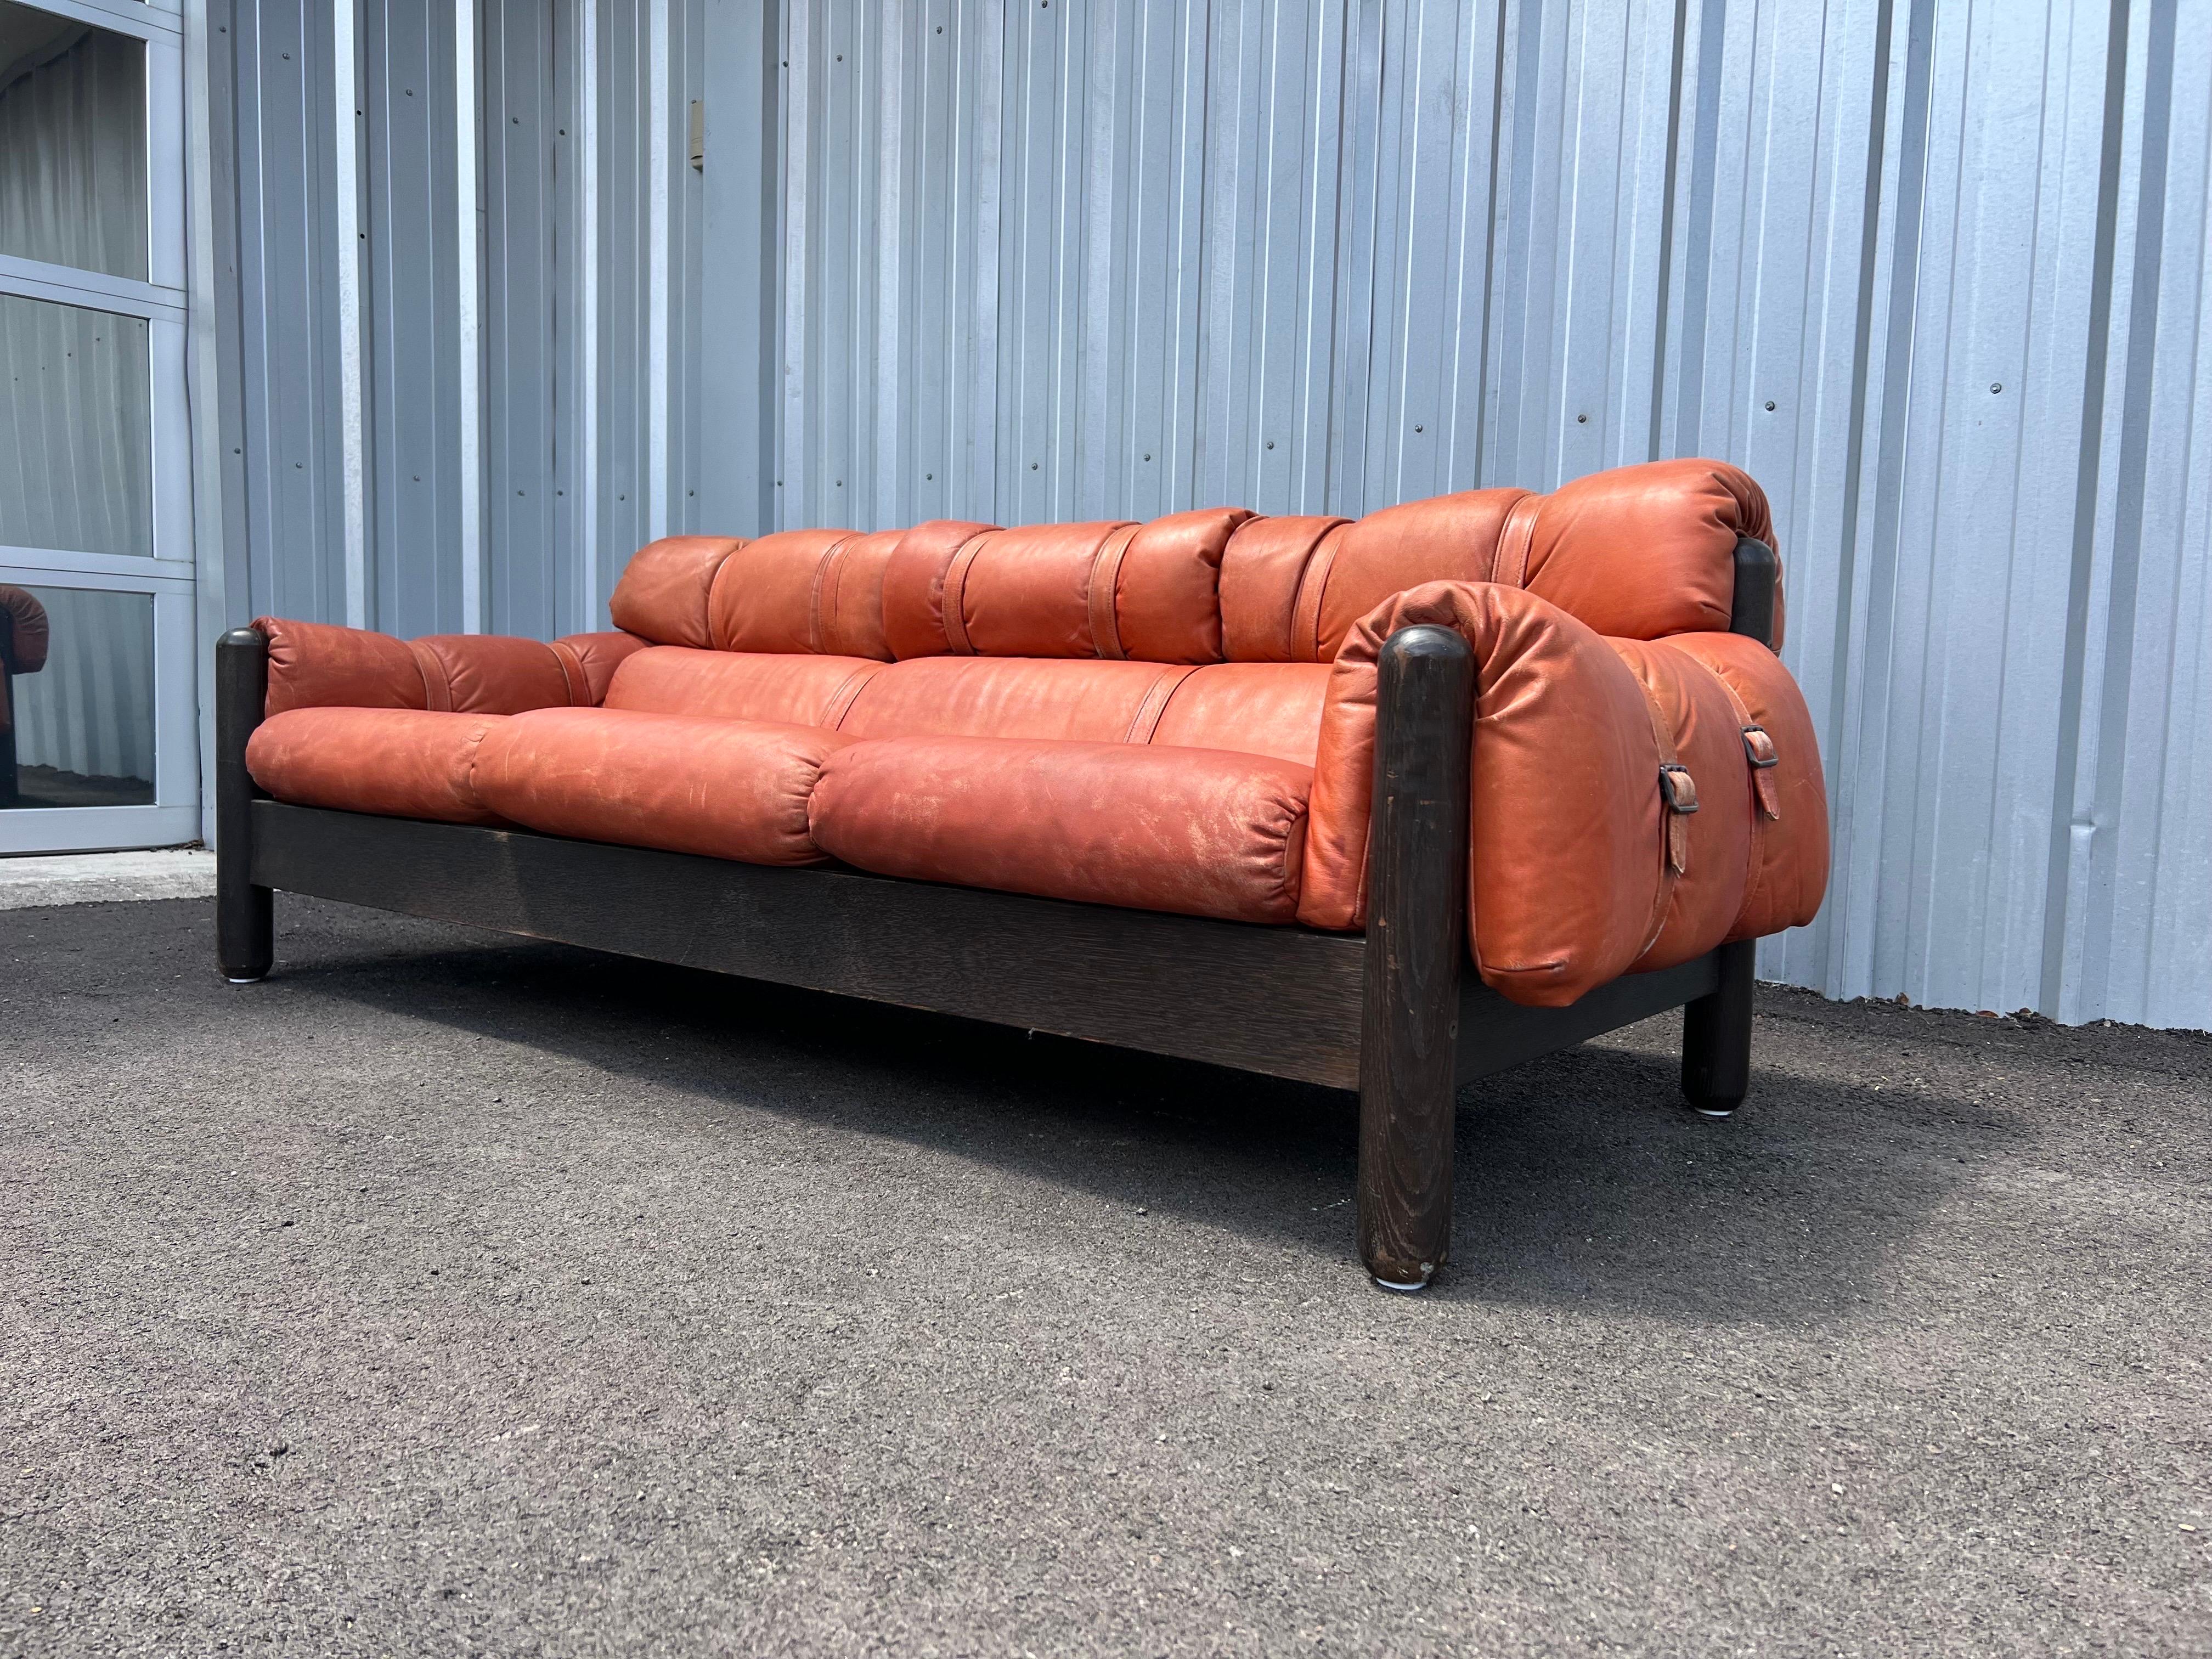 Mid-Century Modern leather sofa by FinnArena, Finland, 1960s features a frame in dark stained oak, loose seat and back leather cushions in a warm cognac color that has a nice patina. This Danish modern 3-seater sofa is in good overall vintage